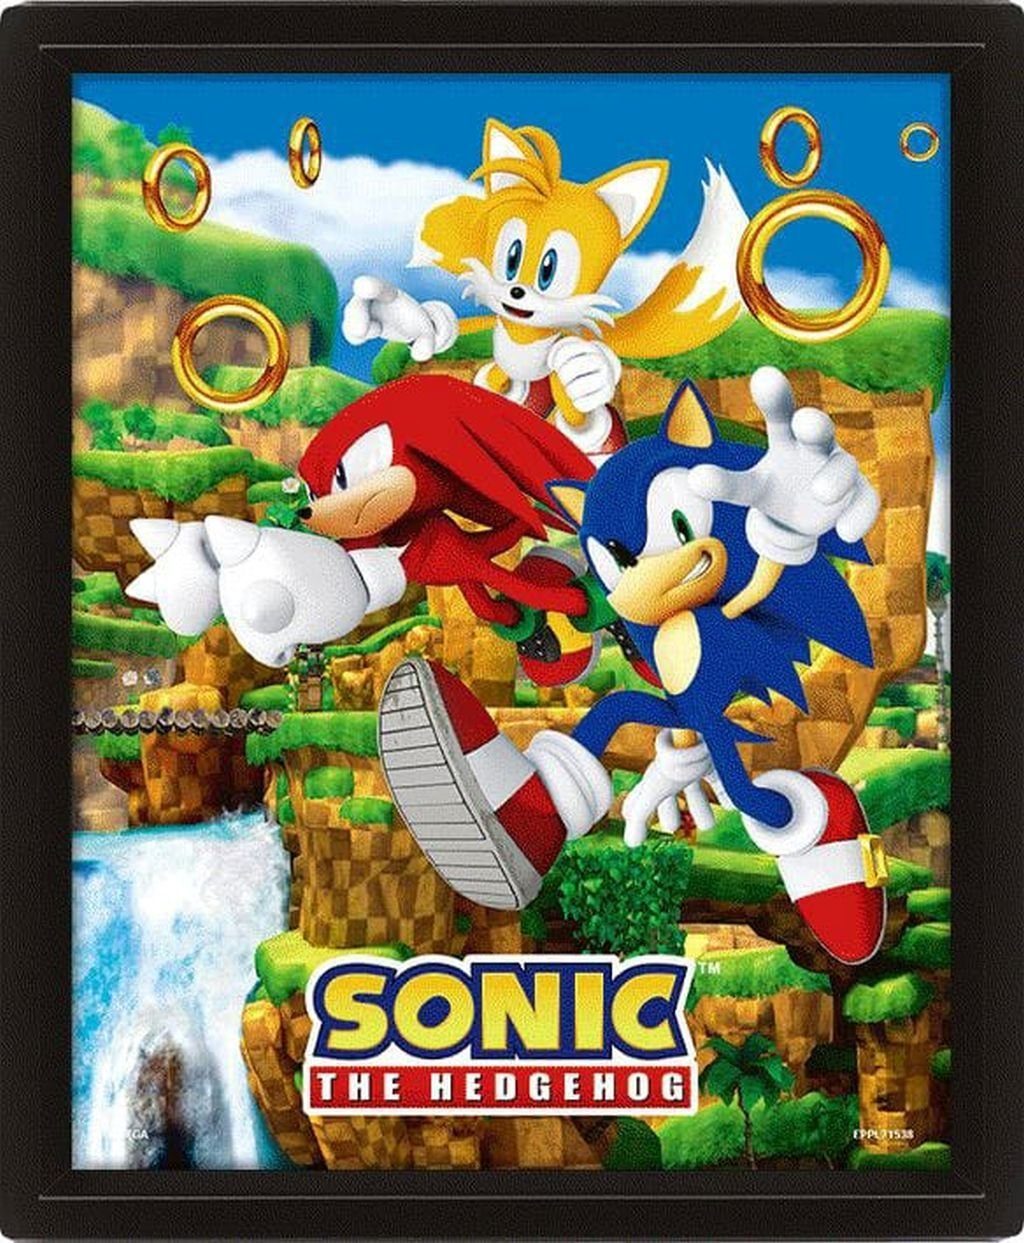 PYRAMID Poster Sonic The Hedgehog 3D-Effekt Poster Catching Rings 26 x 20 cm